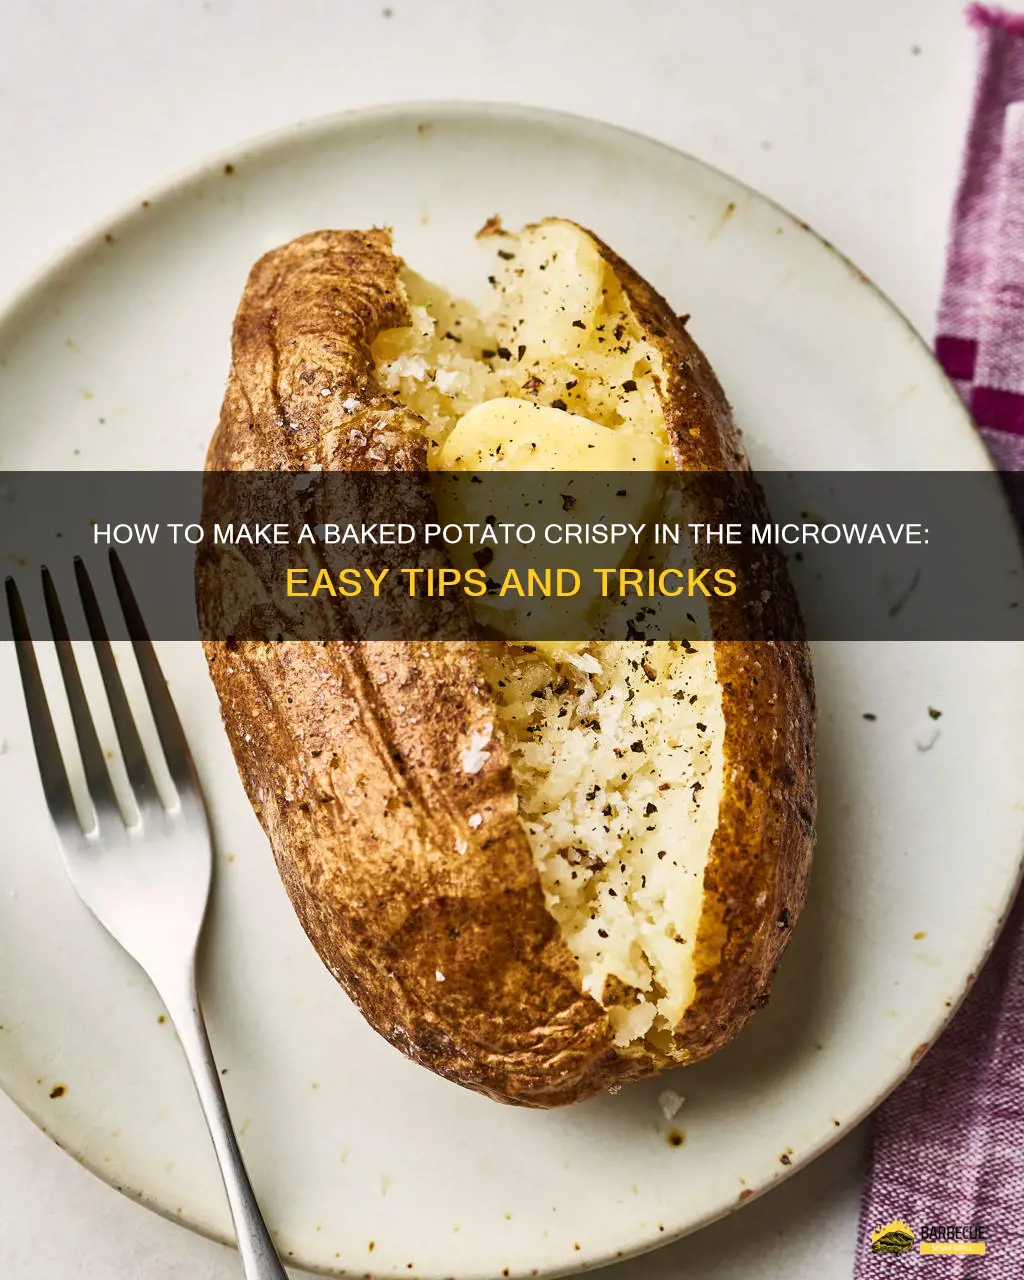 How To Make A Baked Potato Crispy In The Microwave: Easy Tips And ...